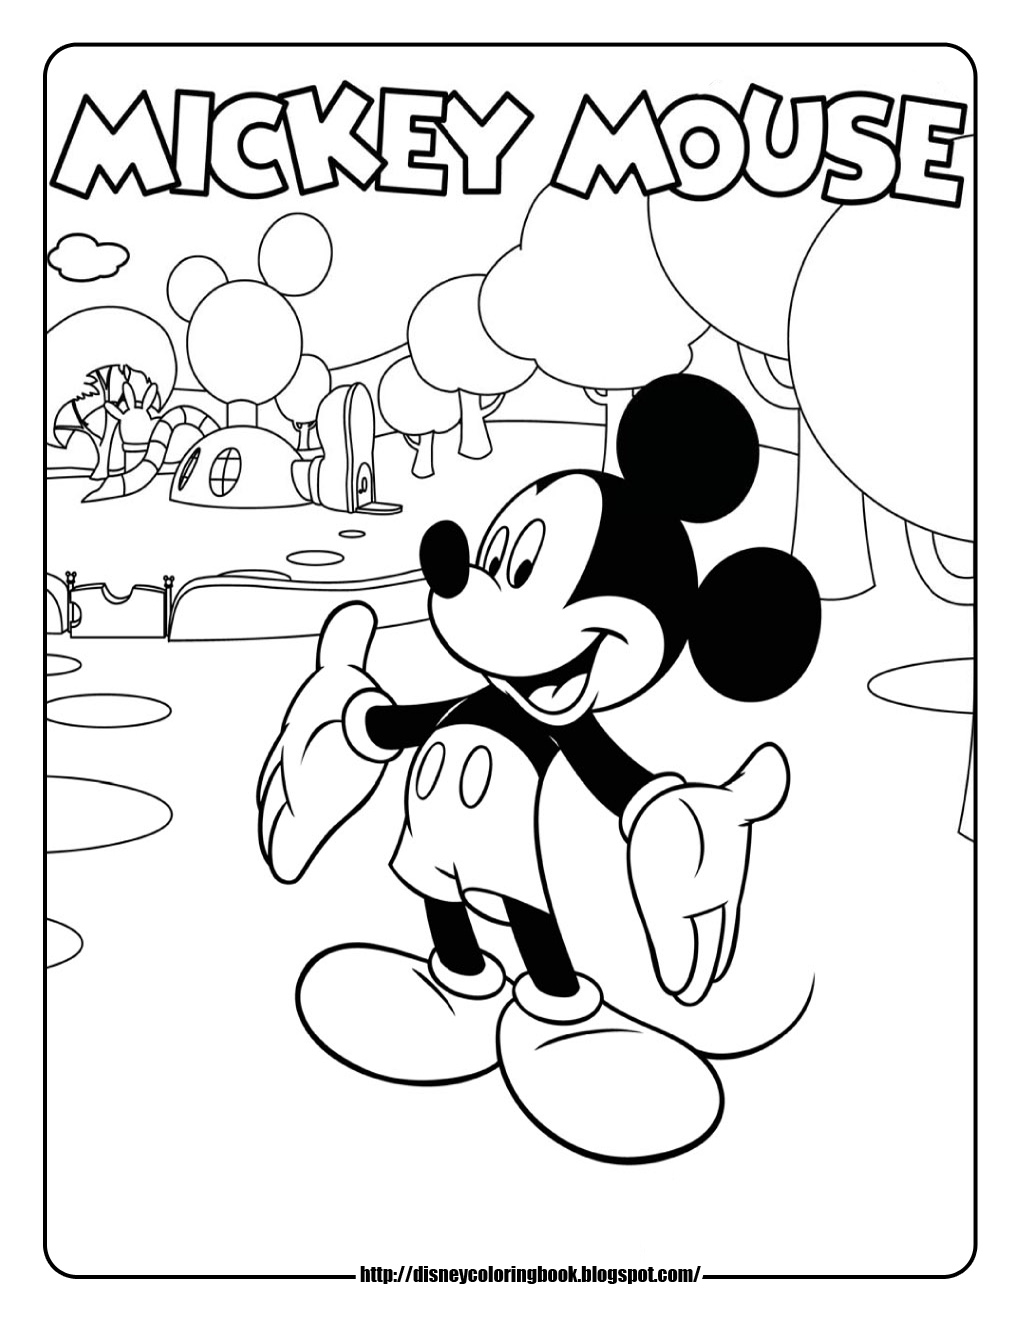 Disney Coloring Pages and Sheets for Kids: Mickey Mouse Clubhouse 1